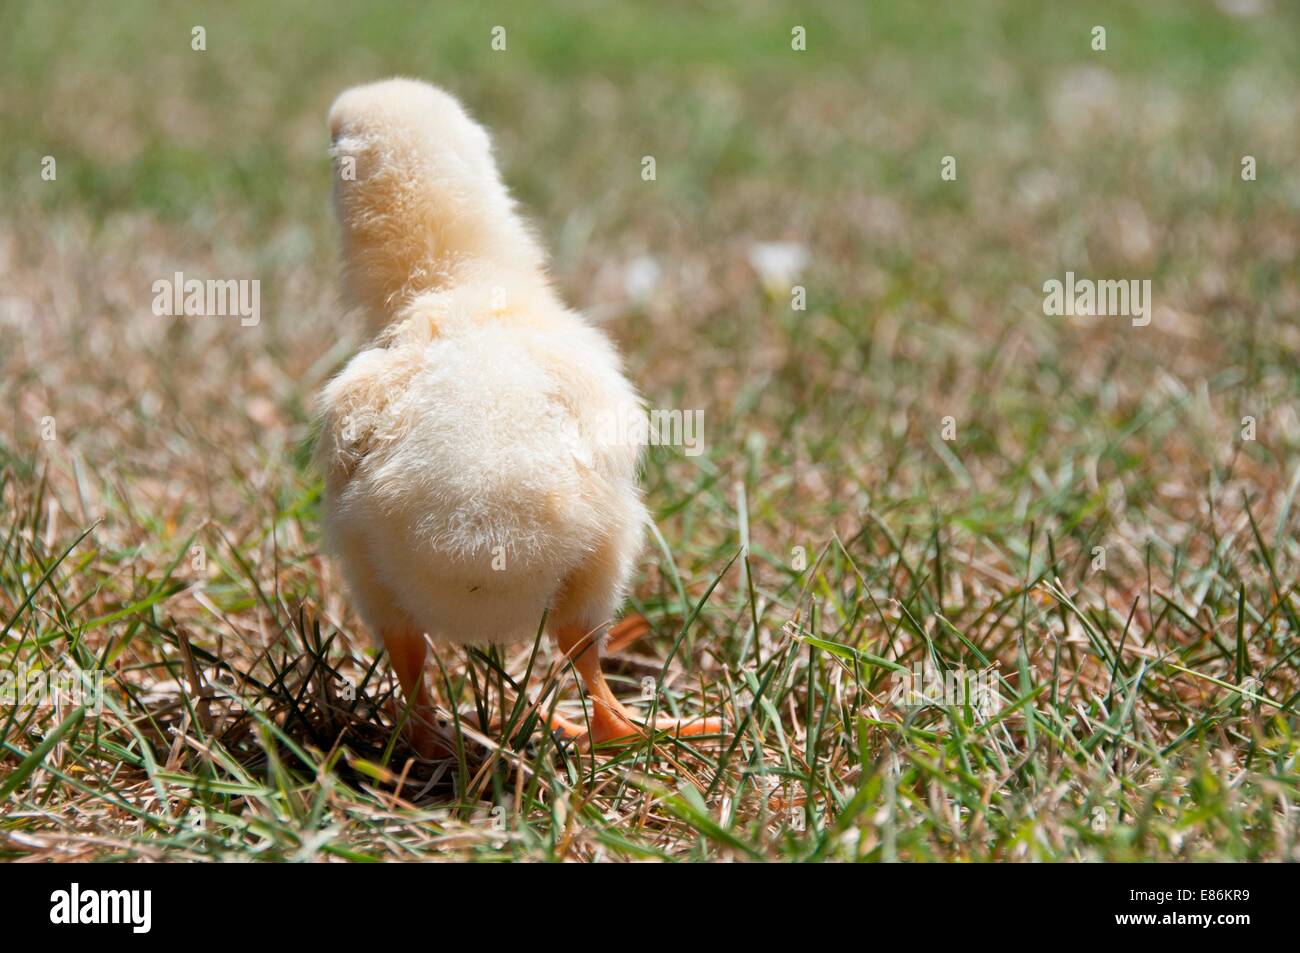 A chick in a field Stock Photo